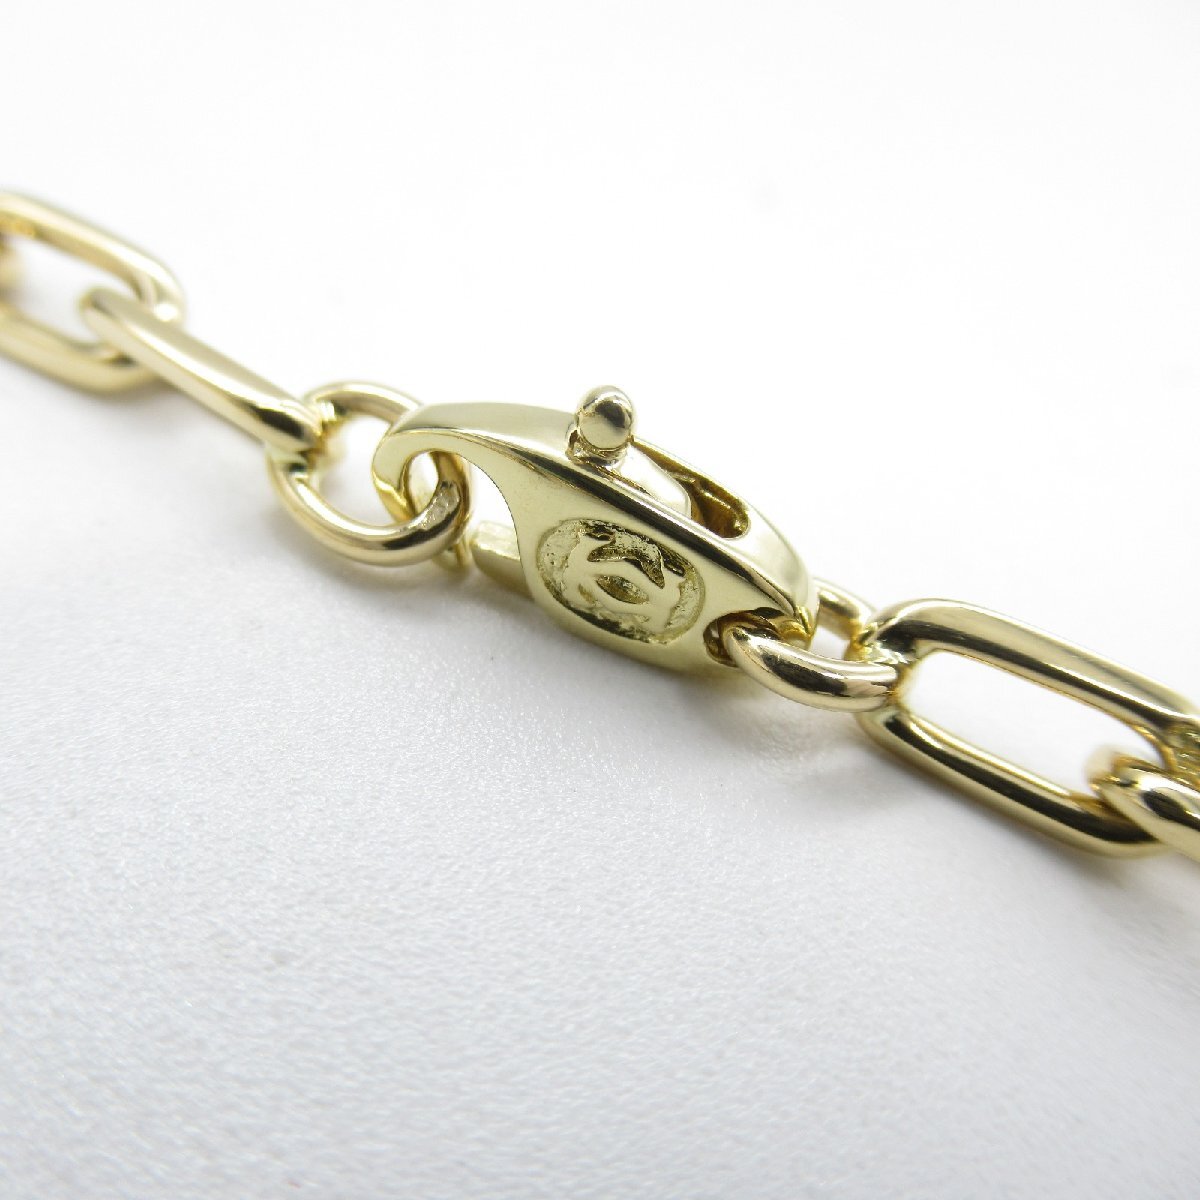  Cartier s Pal ta rental design necklace brand off CARTIER K18( yellow gold ) necklace 750YG used lady's 